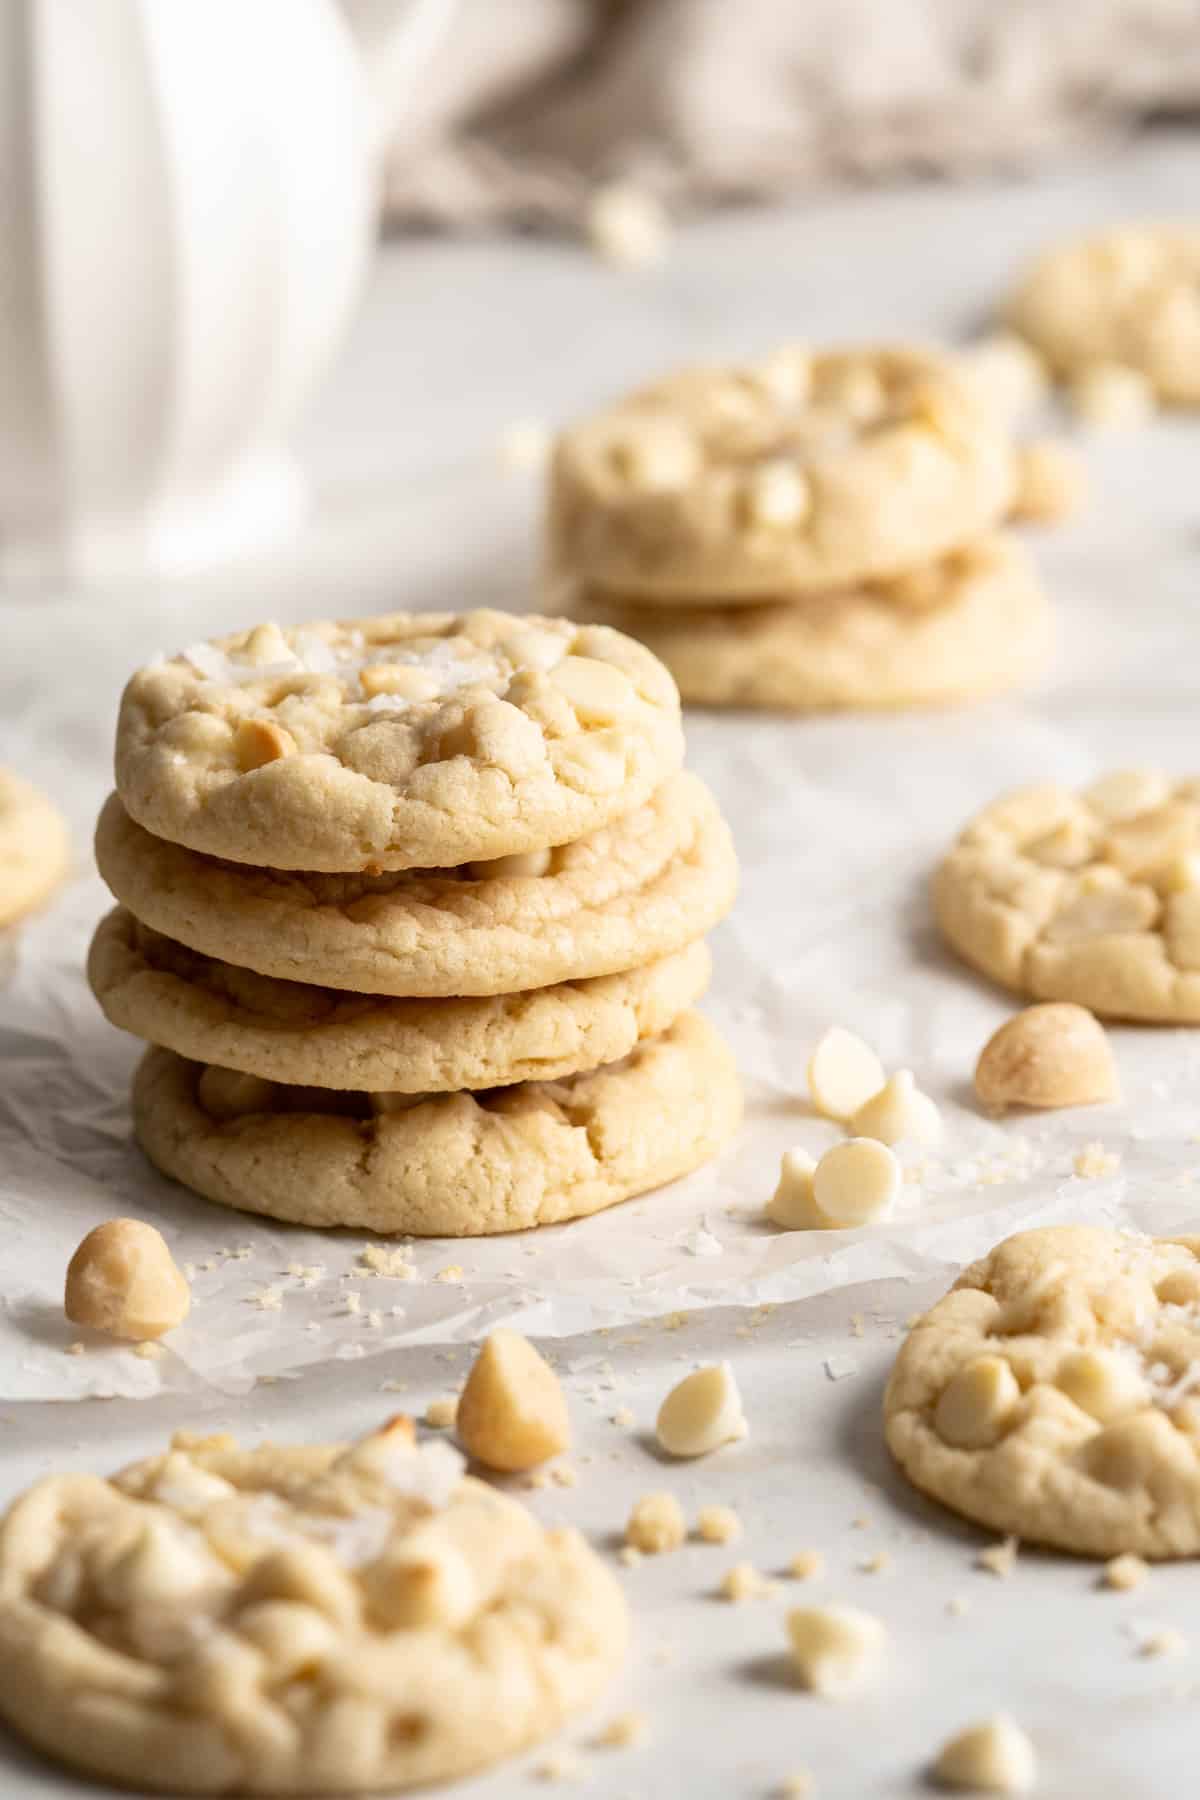 Stack of White Chocolate Macadamia Nut Cookies surrounded by additional cookies, nuts, and chips